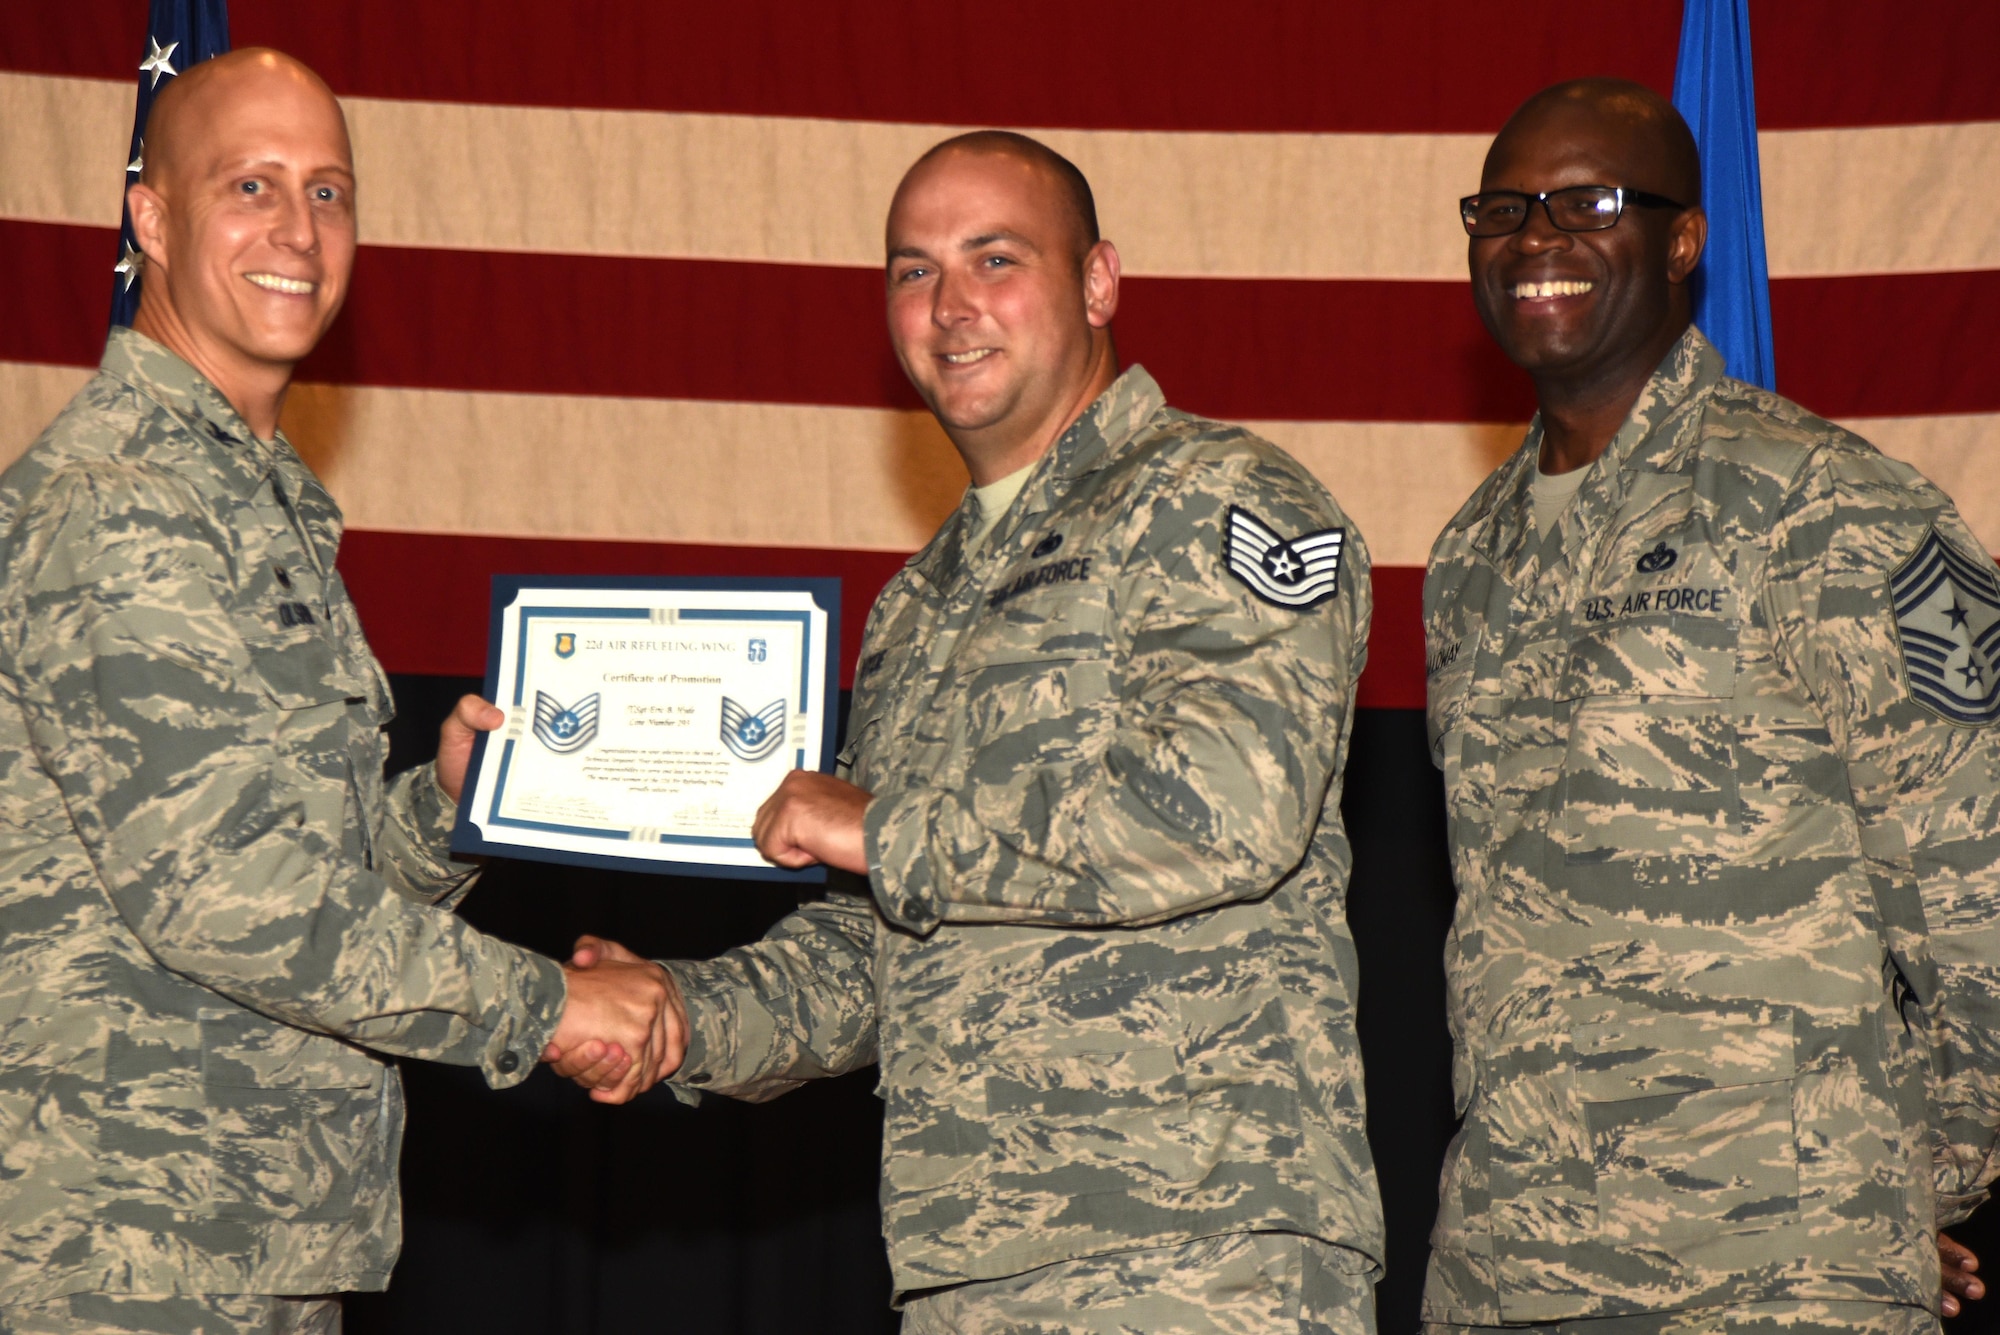 Forty-four 22nd Air Refueling Wing Airmen were recognized for their selection to technical sergeant during a technical sergeant release party, July 20, 2017, at McConnell Air Force Base, Kan. Technical Sergeants continuously strive to further their development as technicians, supervisors and leaders. (U.S. Air Force photo/Airman 1st Class Alan Ricker)